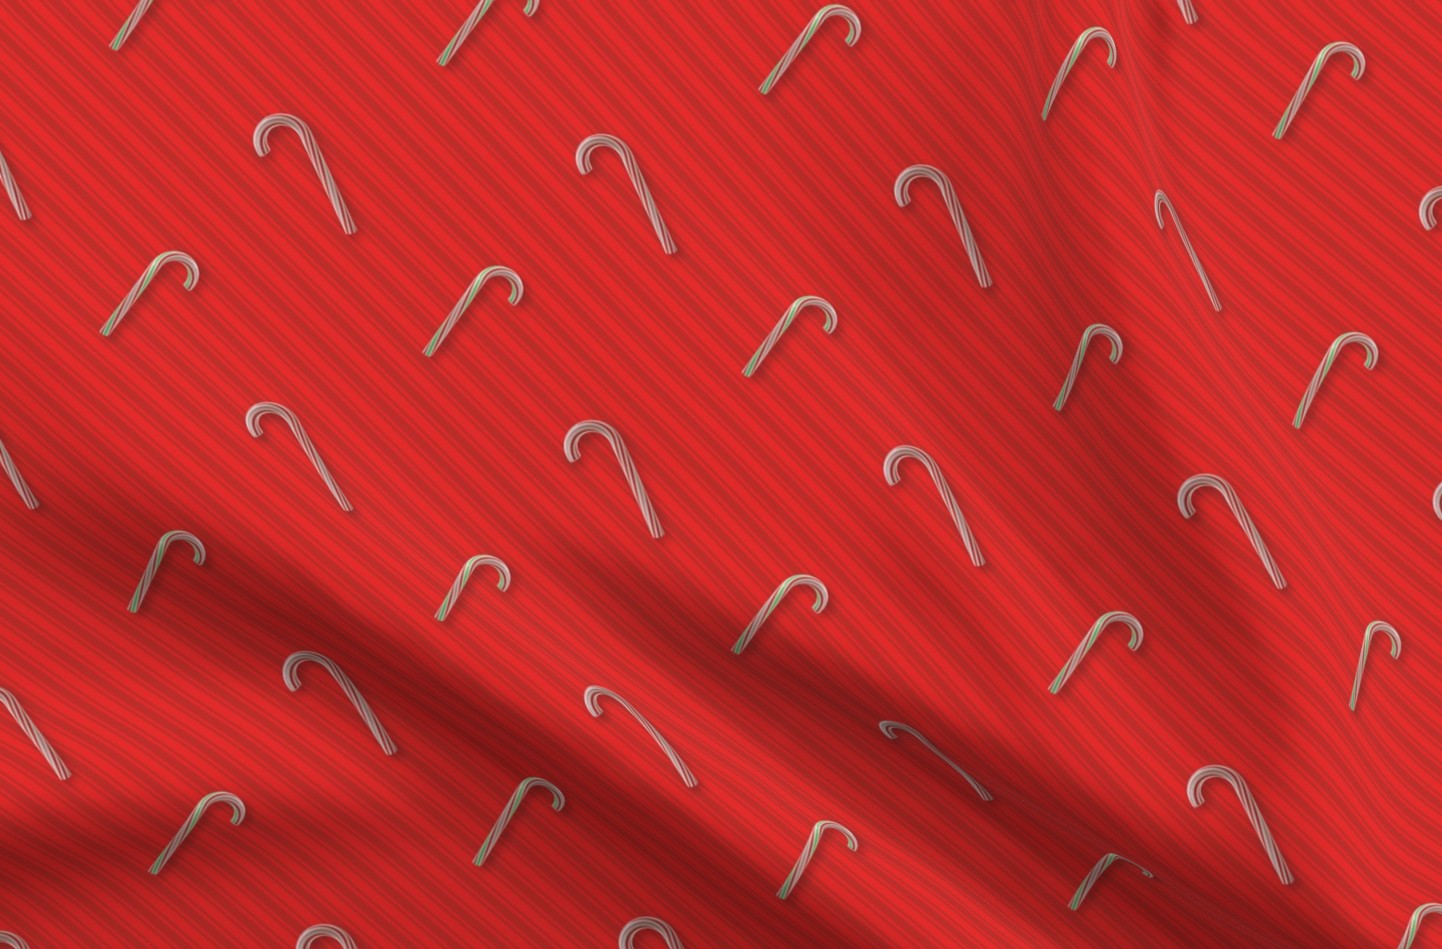 Candy Canes on Red Stripes Printed Fabric by Studio Ten Design